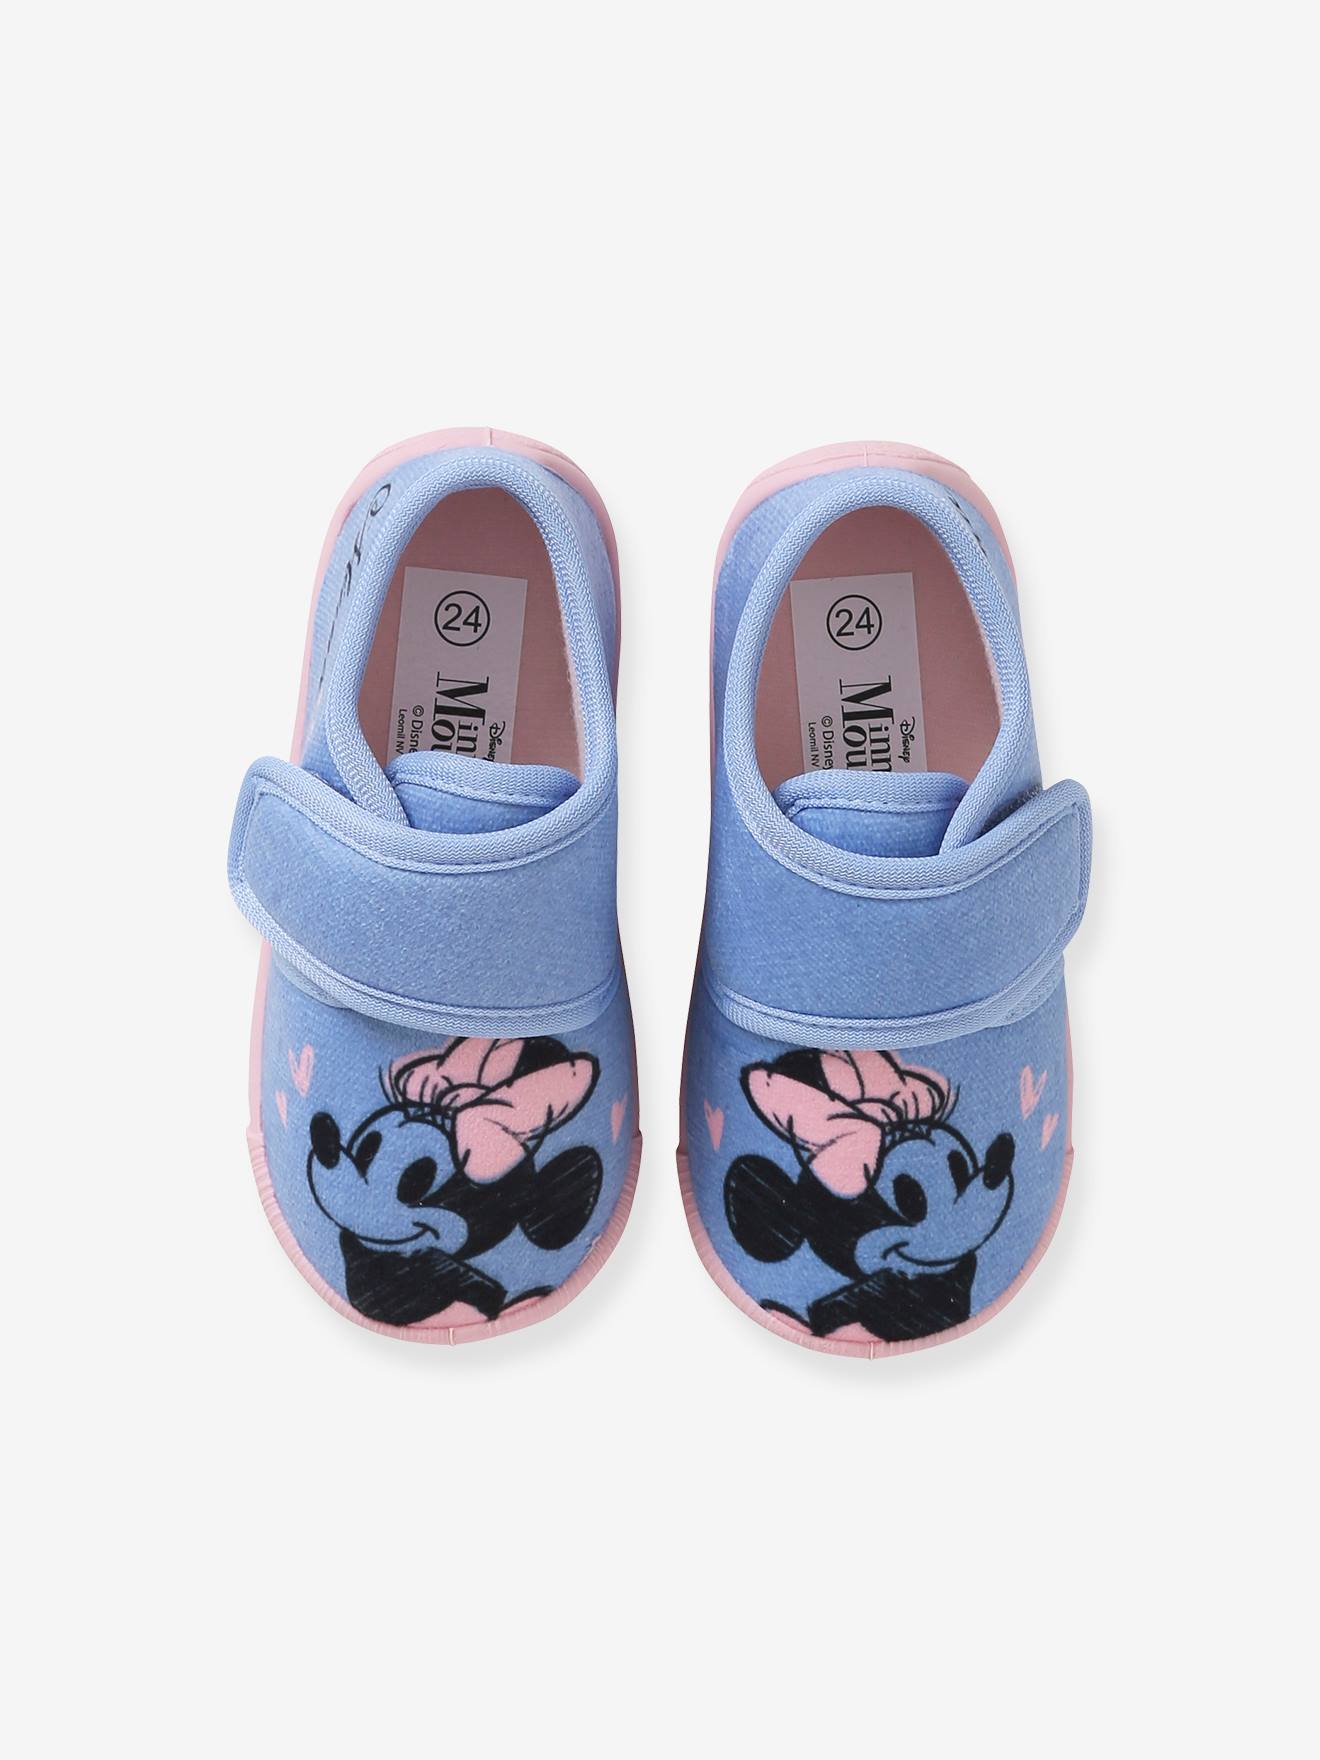 Disney® Minnie Mouse Shoes, for Children - blue medium solid with design,  Shoes